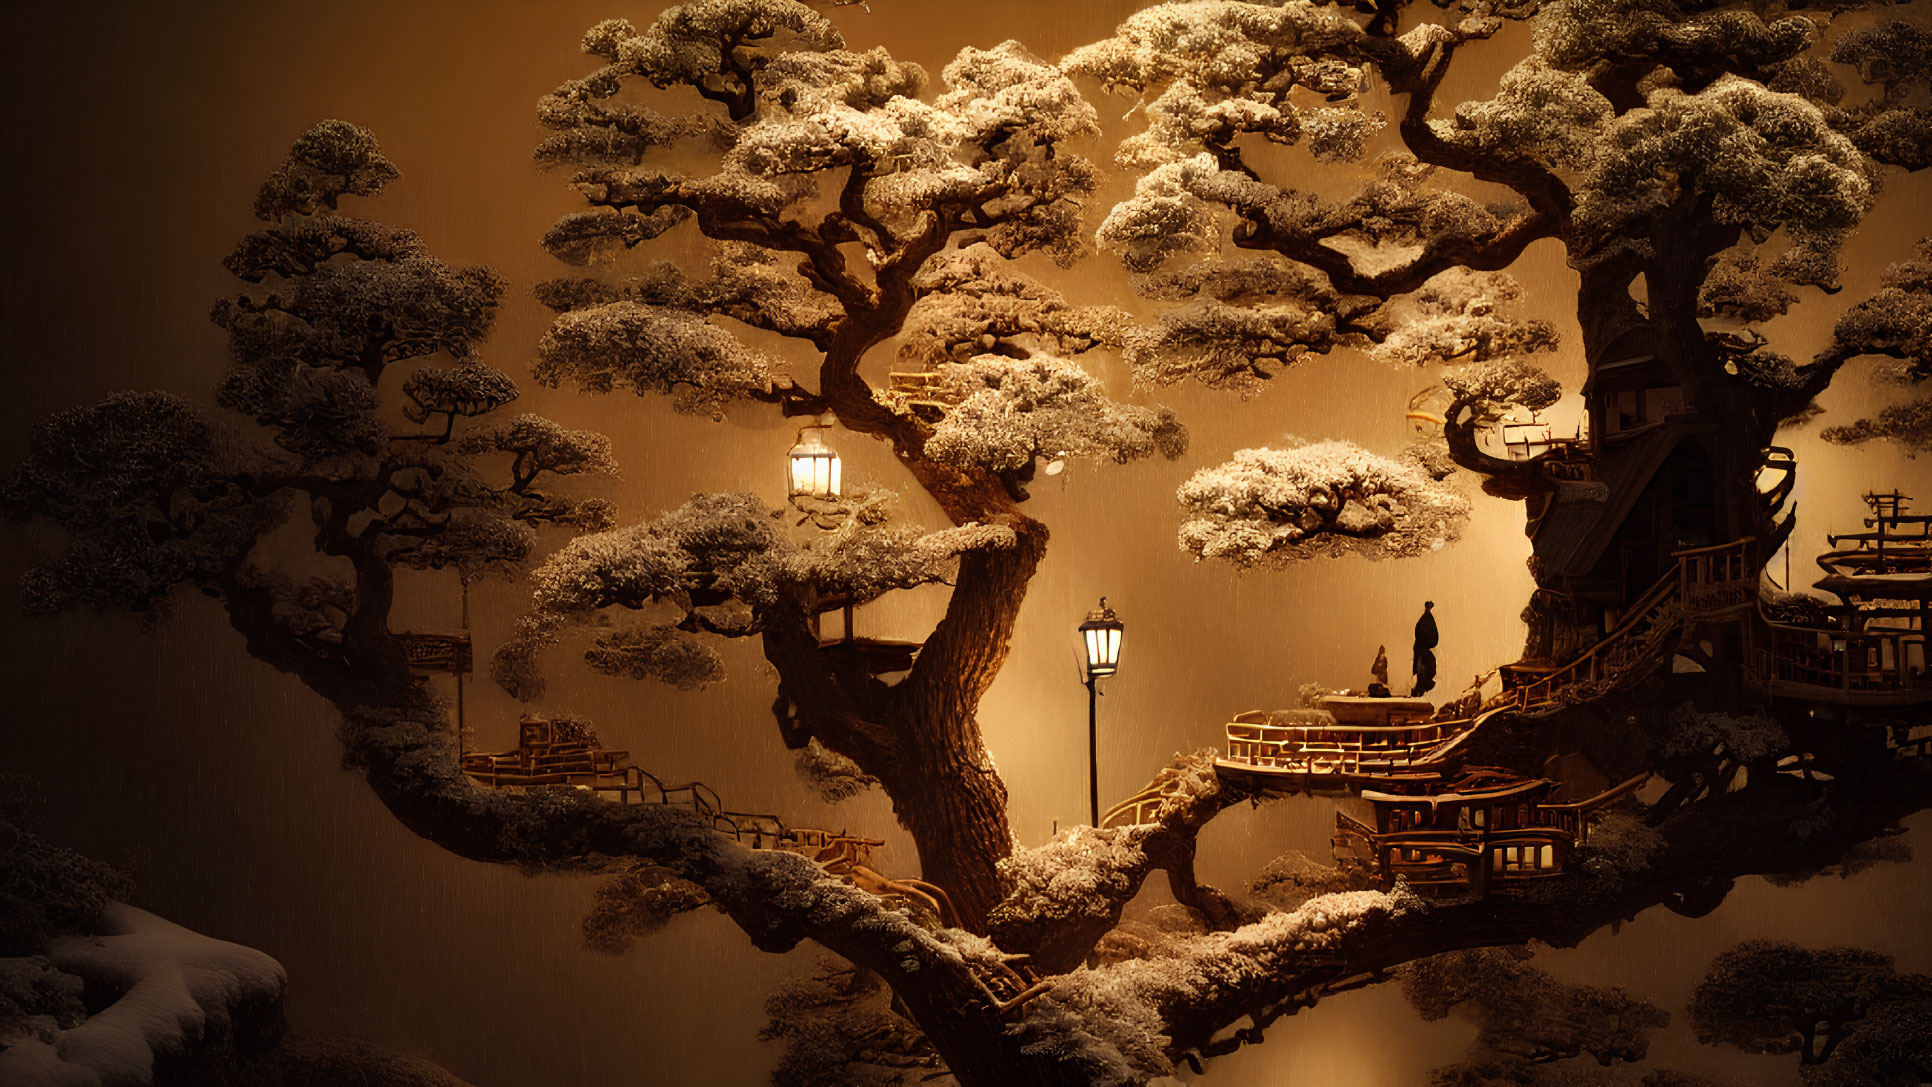 Enchanting tree with lanterns lighting wooden staircases and platforms